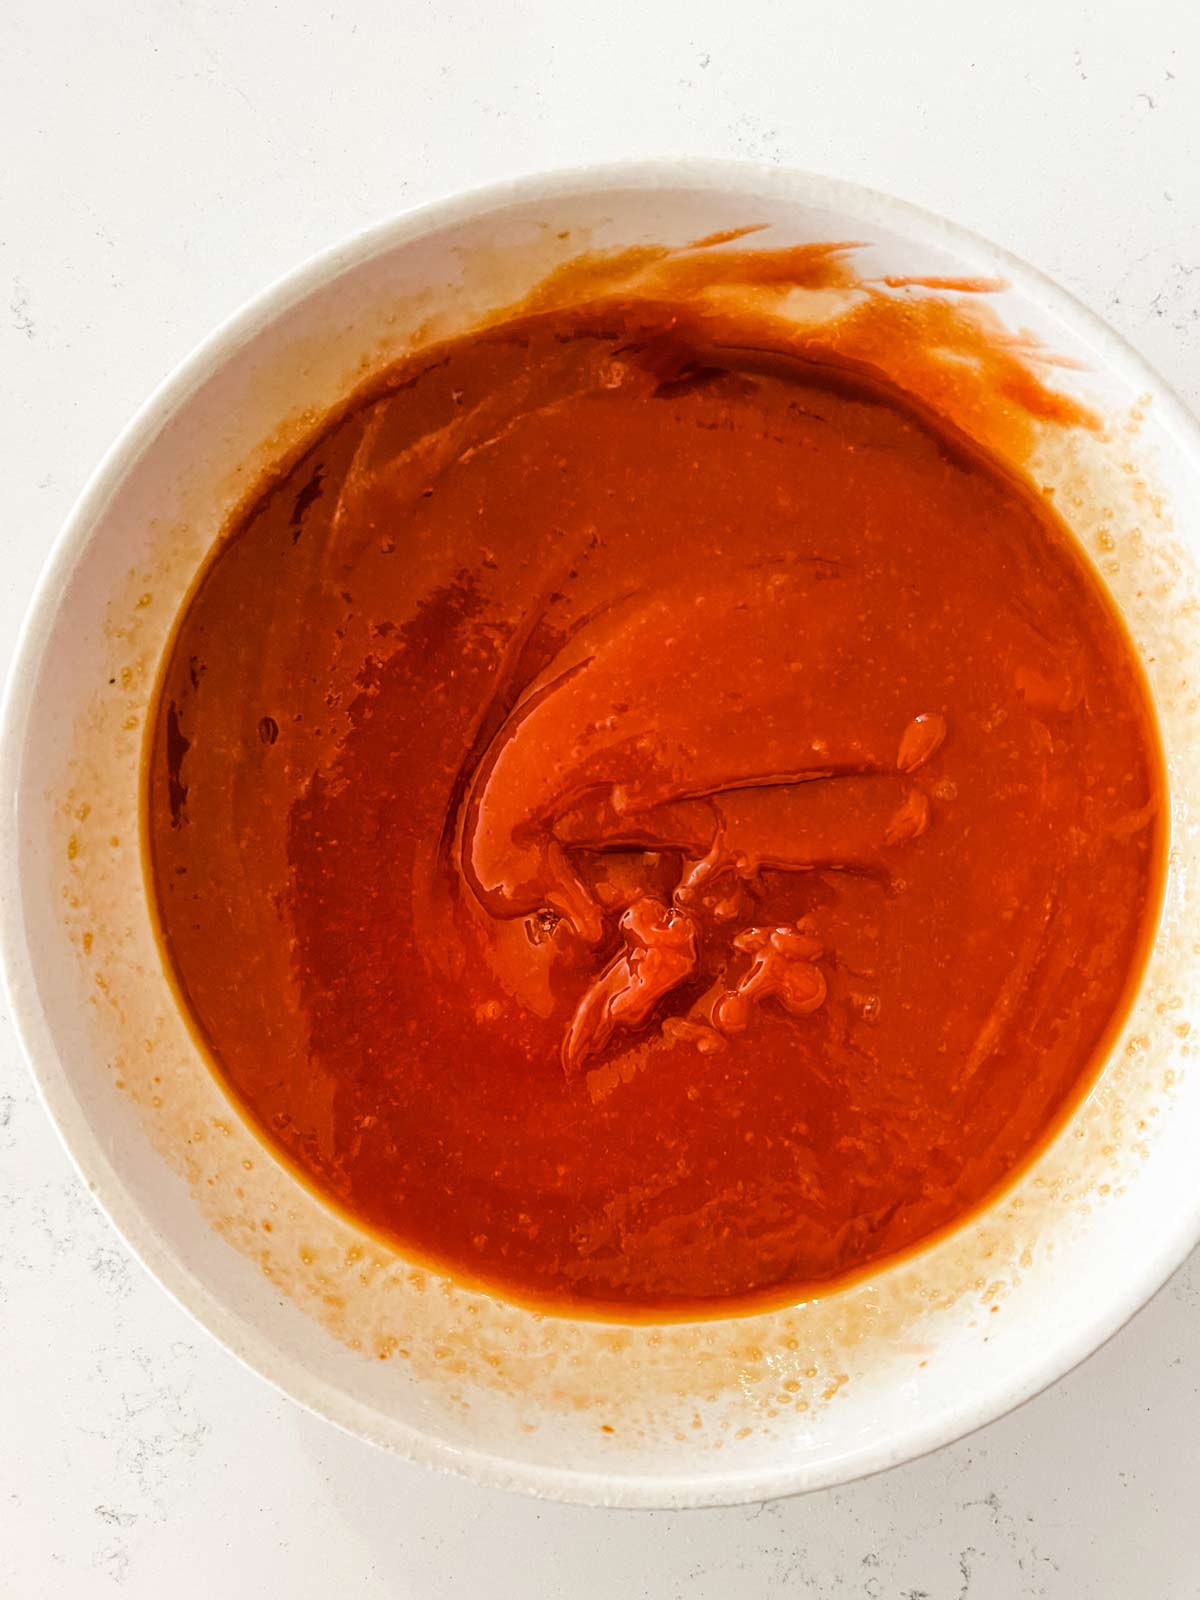 Ketchup, brown sugar, soy sauce, and mustard that have been mixed together in a small bowl